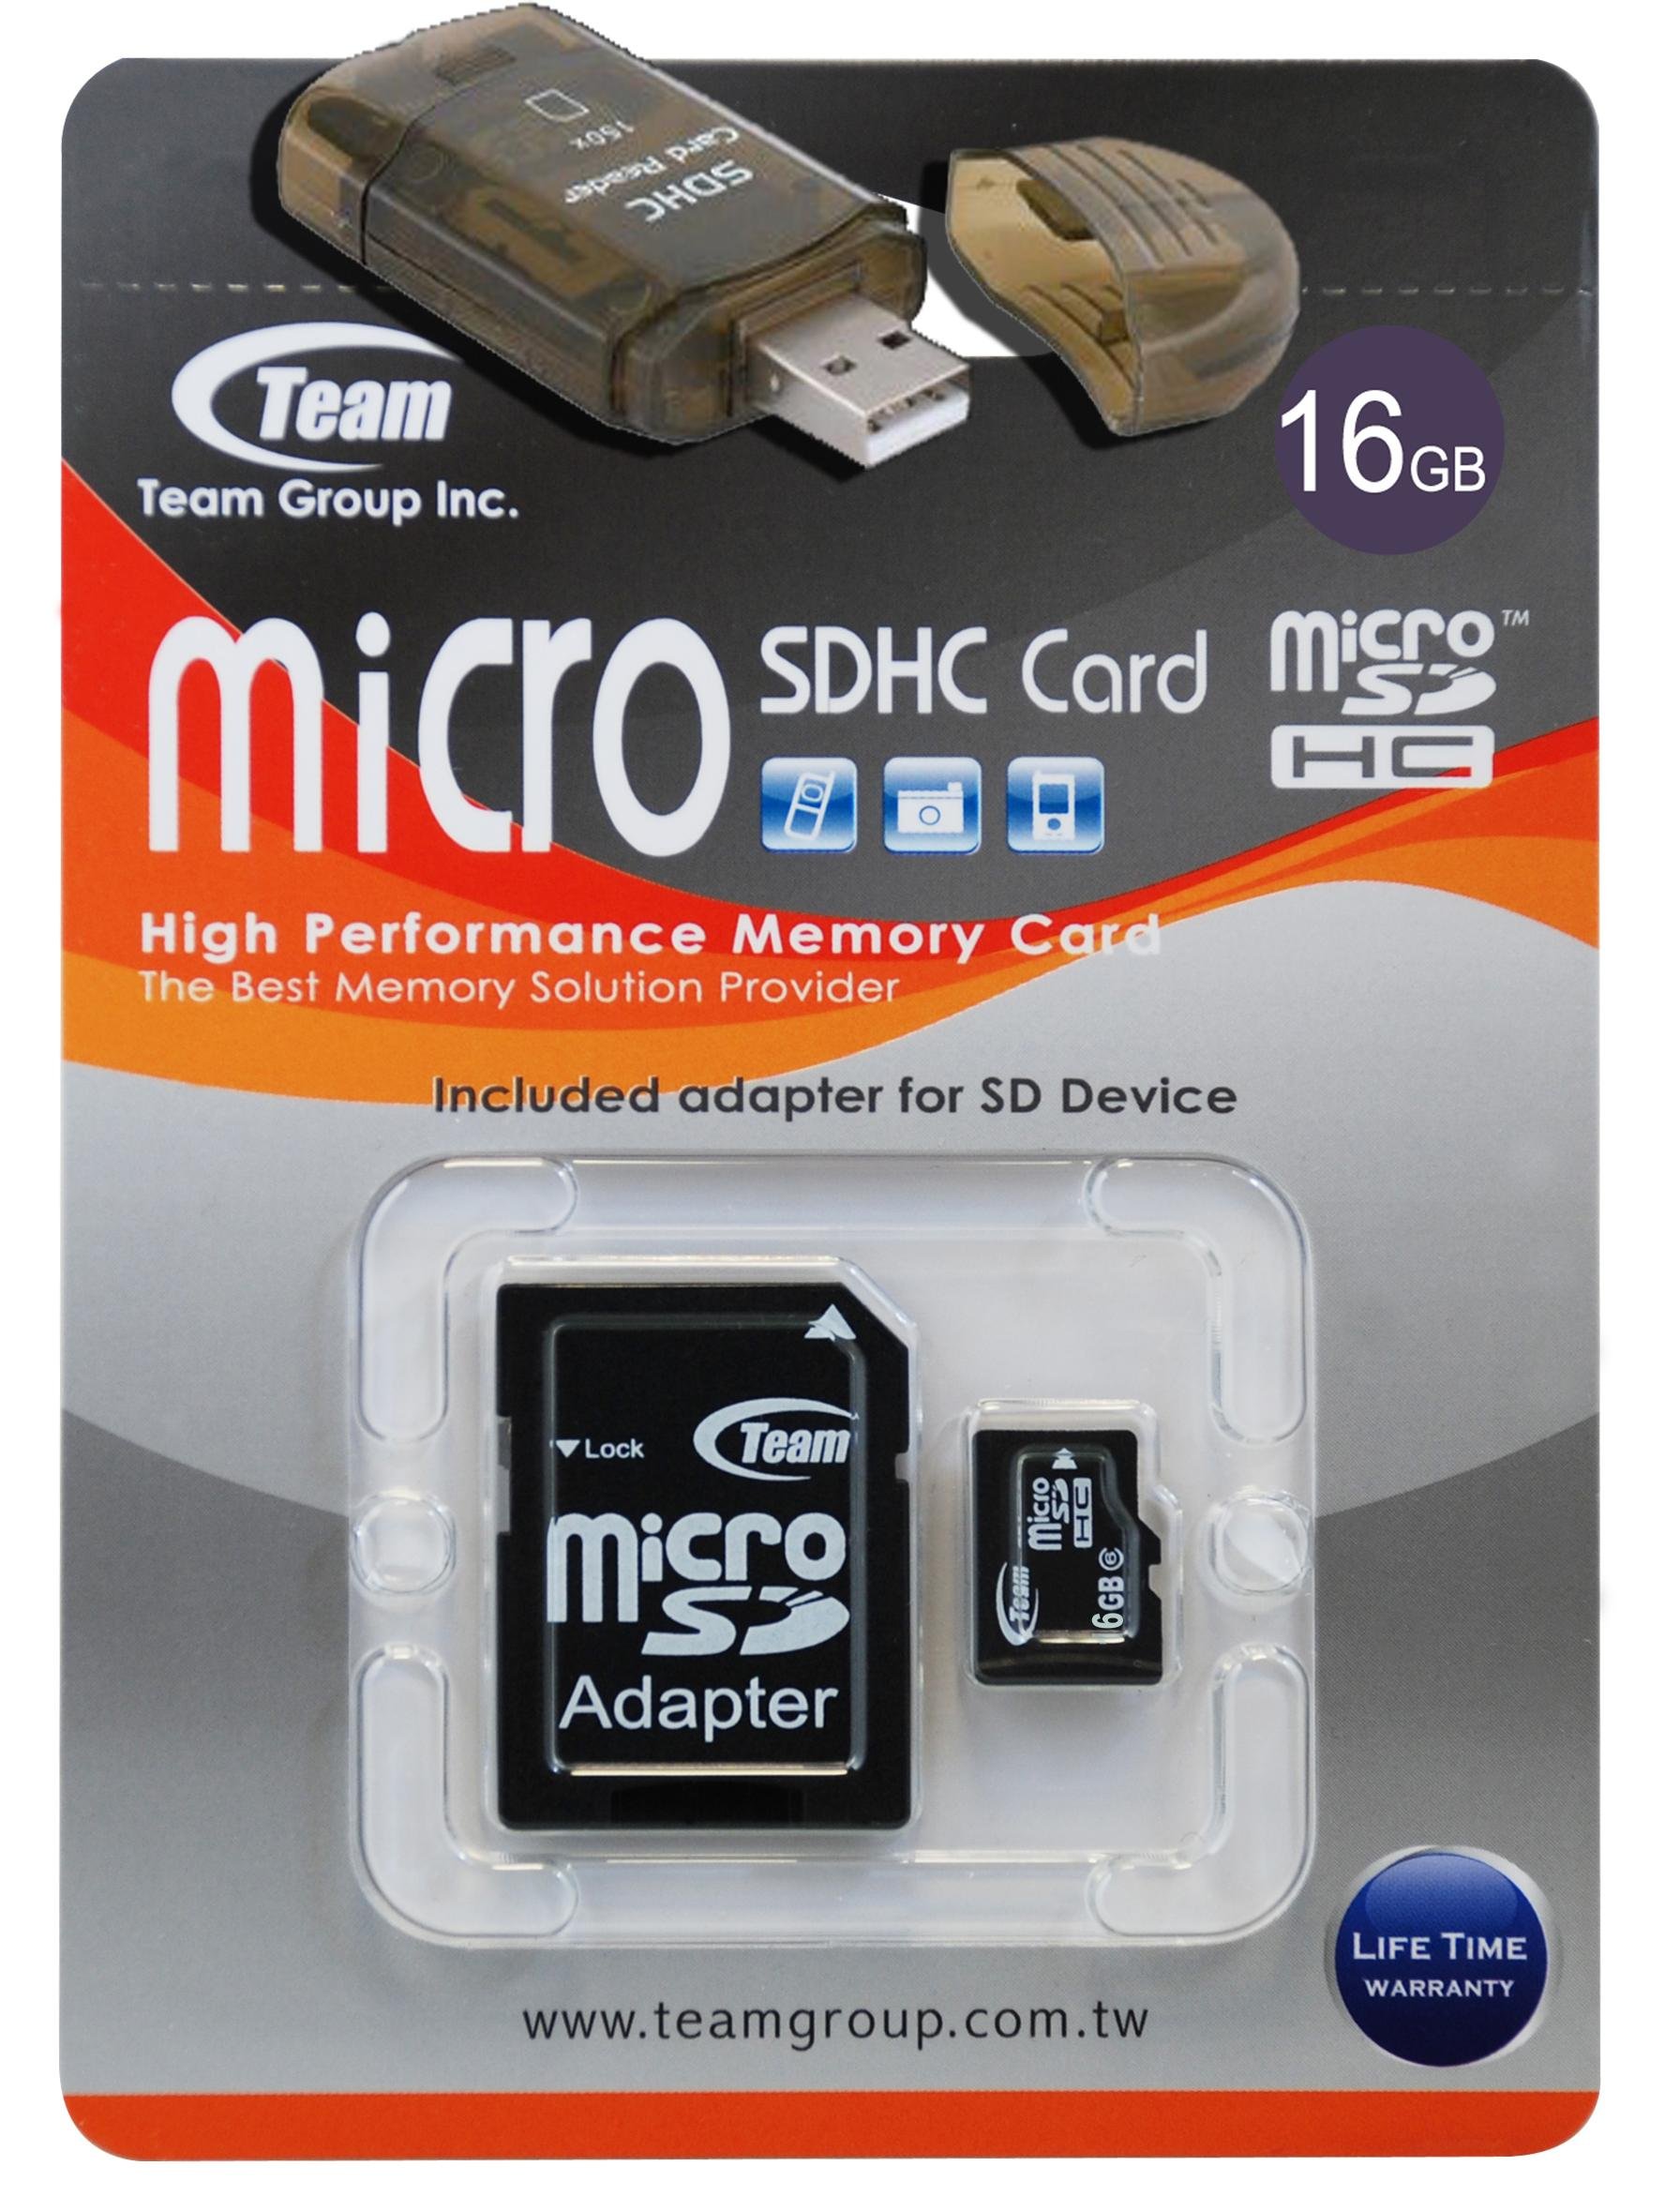 16GB Turbo Speed Class 6 MicroSDHC Memory Card For HTC NEXUS ONE OZONE P3650. High Speed Card Comes with a free SD and USB Ad